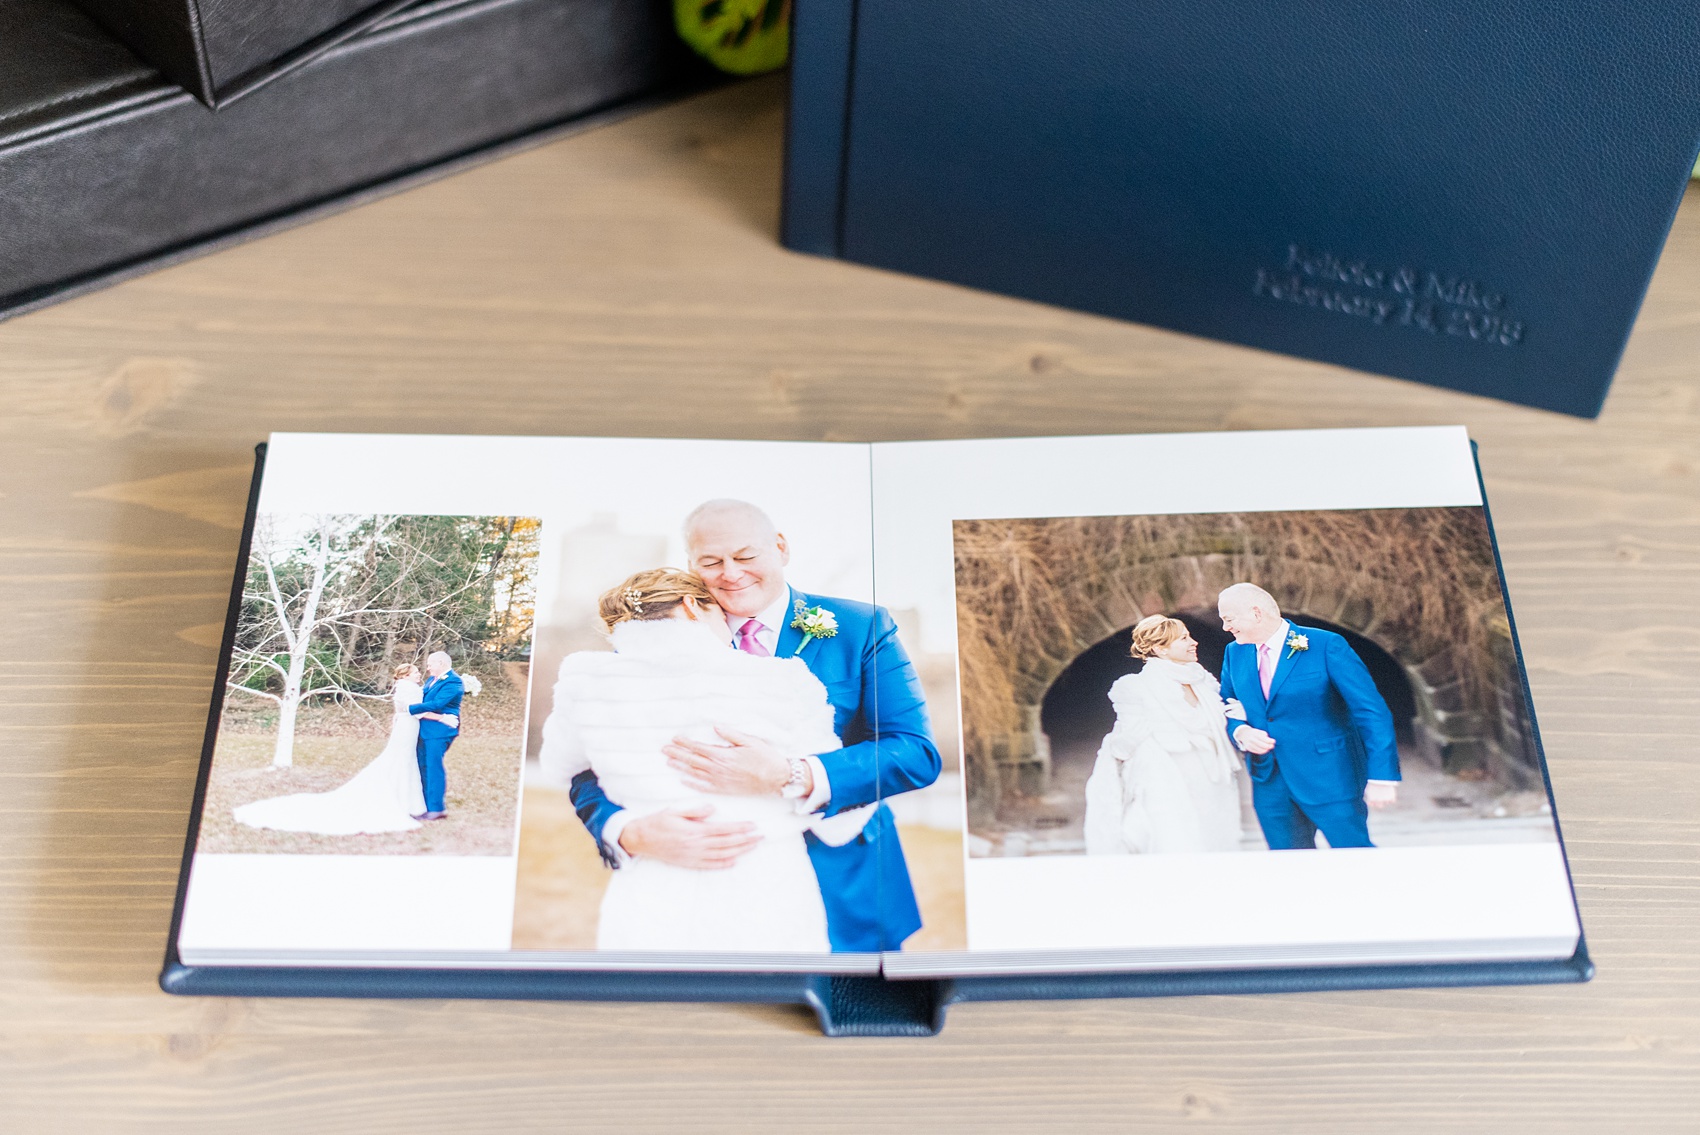 Photos from a winter wedding at Central Park Loeb Boathouse in NYC, by Mikkel Paige Photography, are beautifully displayed. The bride and groom chose a navy blue leather 12x12" album with spine and cover debossing to remember their day. #mikkelpaige #centralparkwedding #loebboathousewedding #NYCweddingphotographer #navyblueweddingalbum #parentalbums